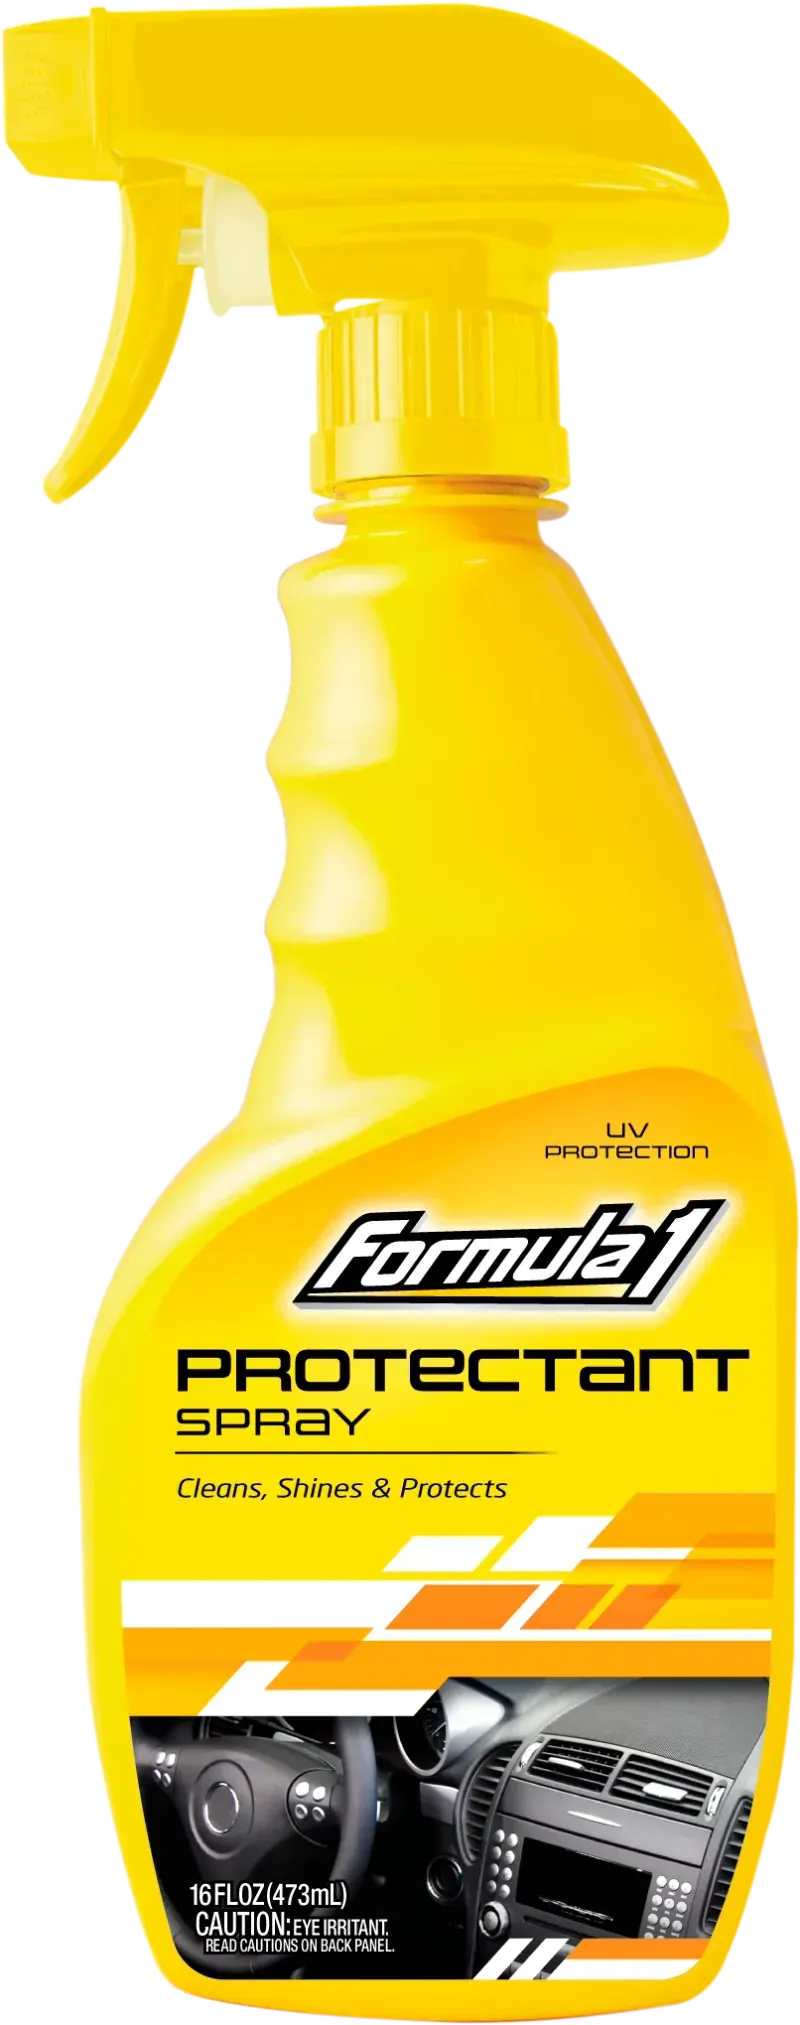 Protectant Spray Renews, Shines and Protects 16 Oz - Formula 1 | Universal Auto Spares